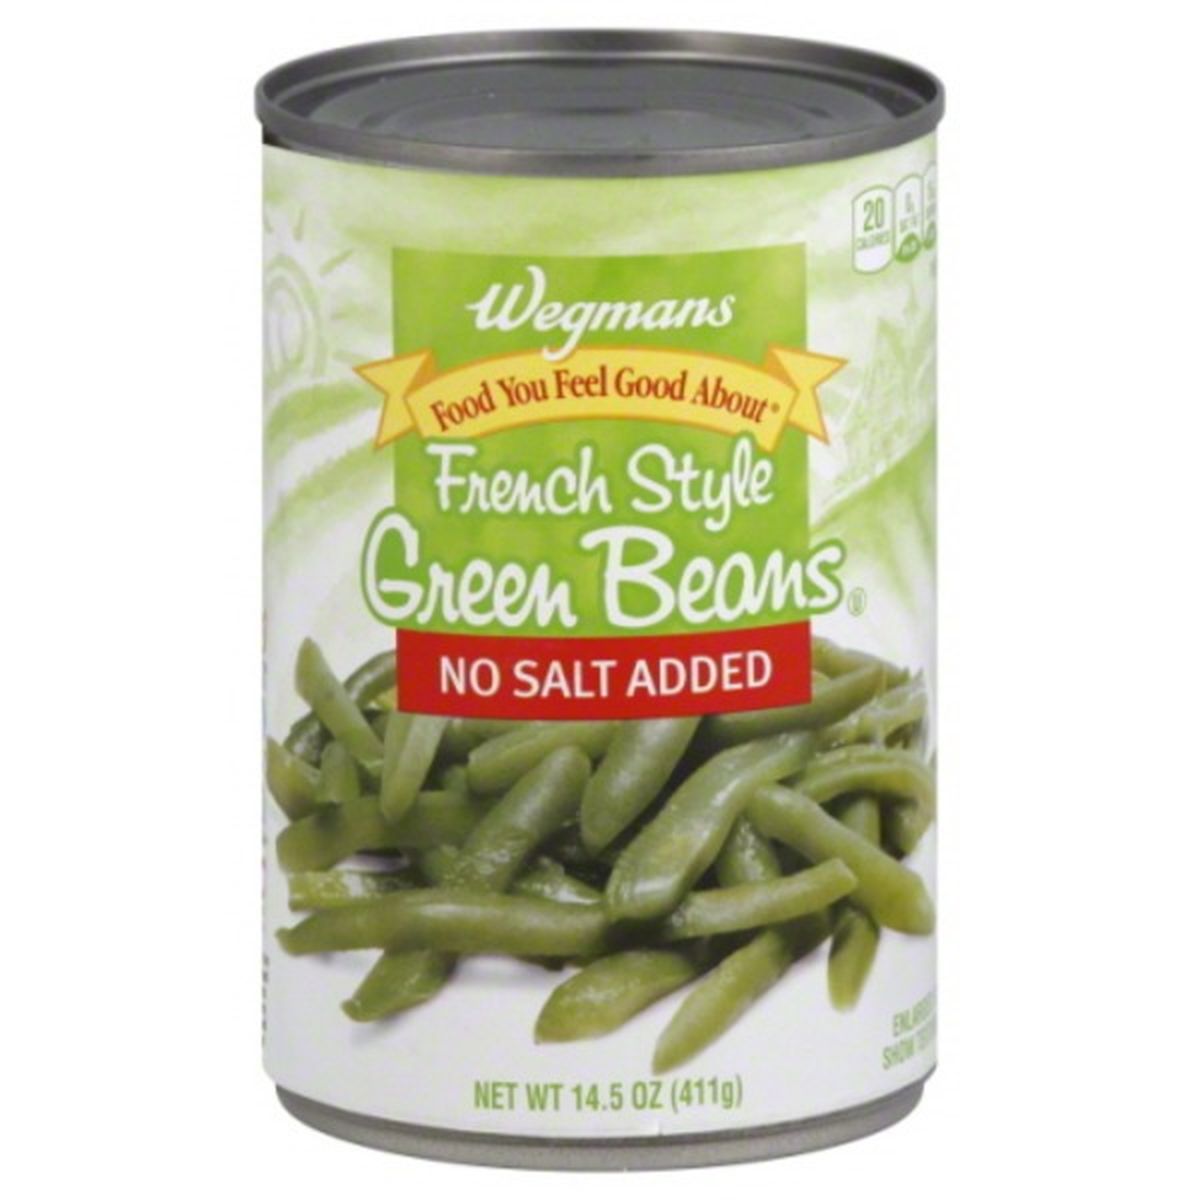 Calories in Wegmans French Style Green Beans, No Salt Added